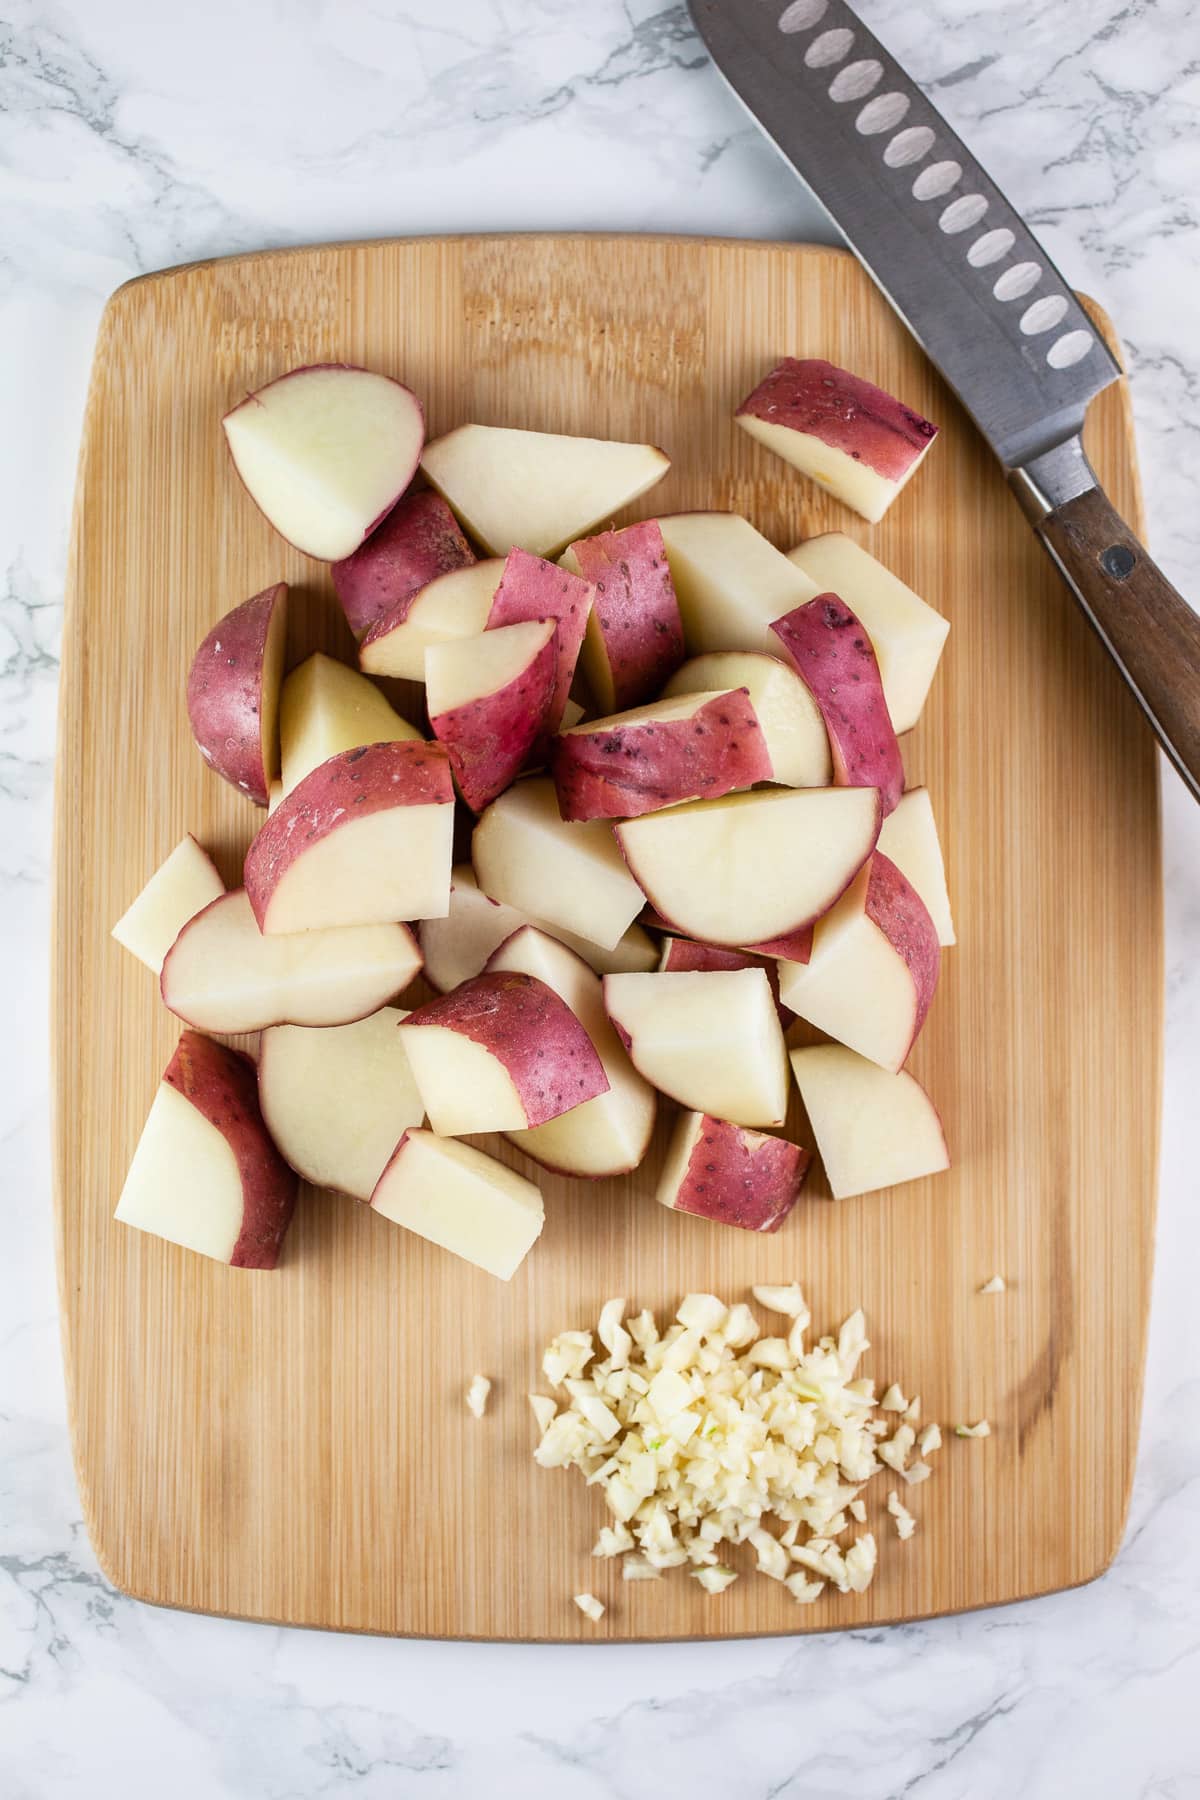 Minced garlic and diced red potatoes on wooden cutting board with knife.